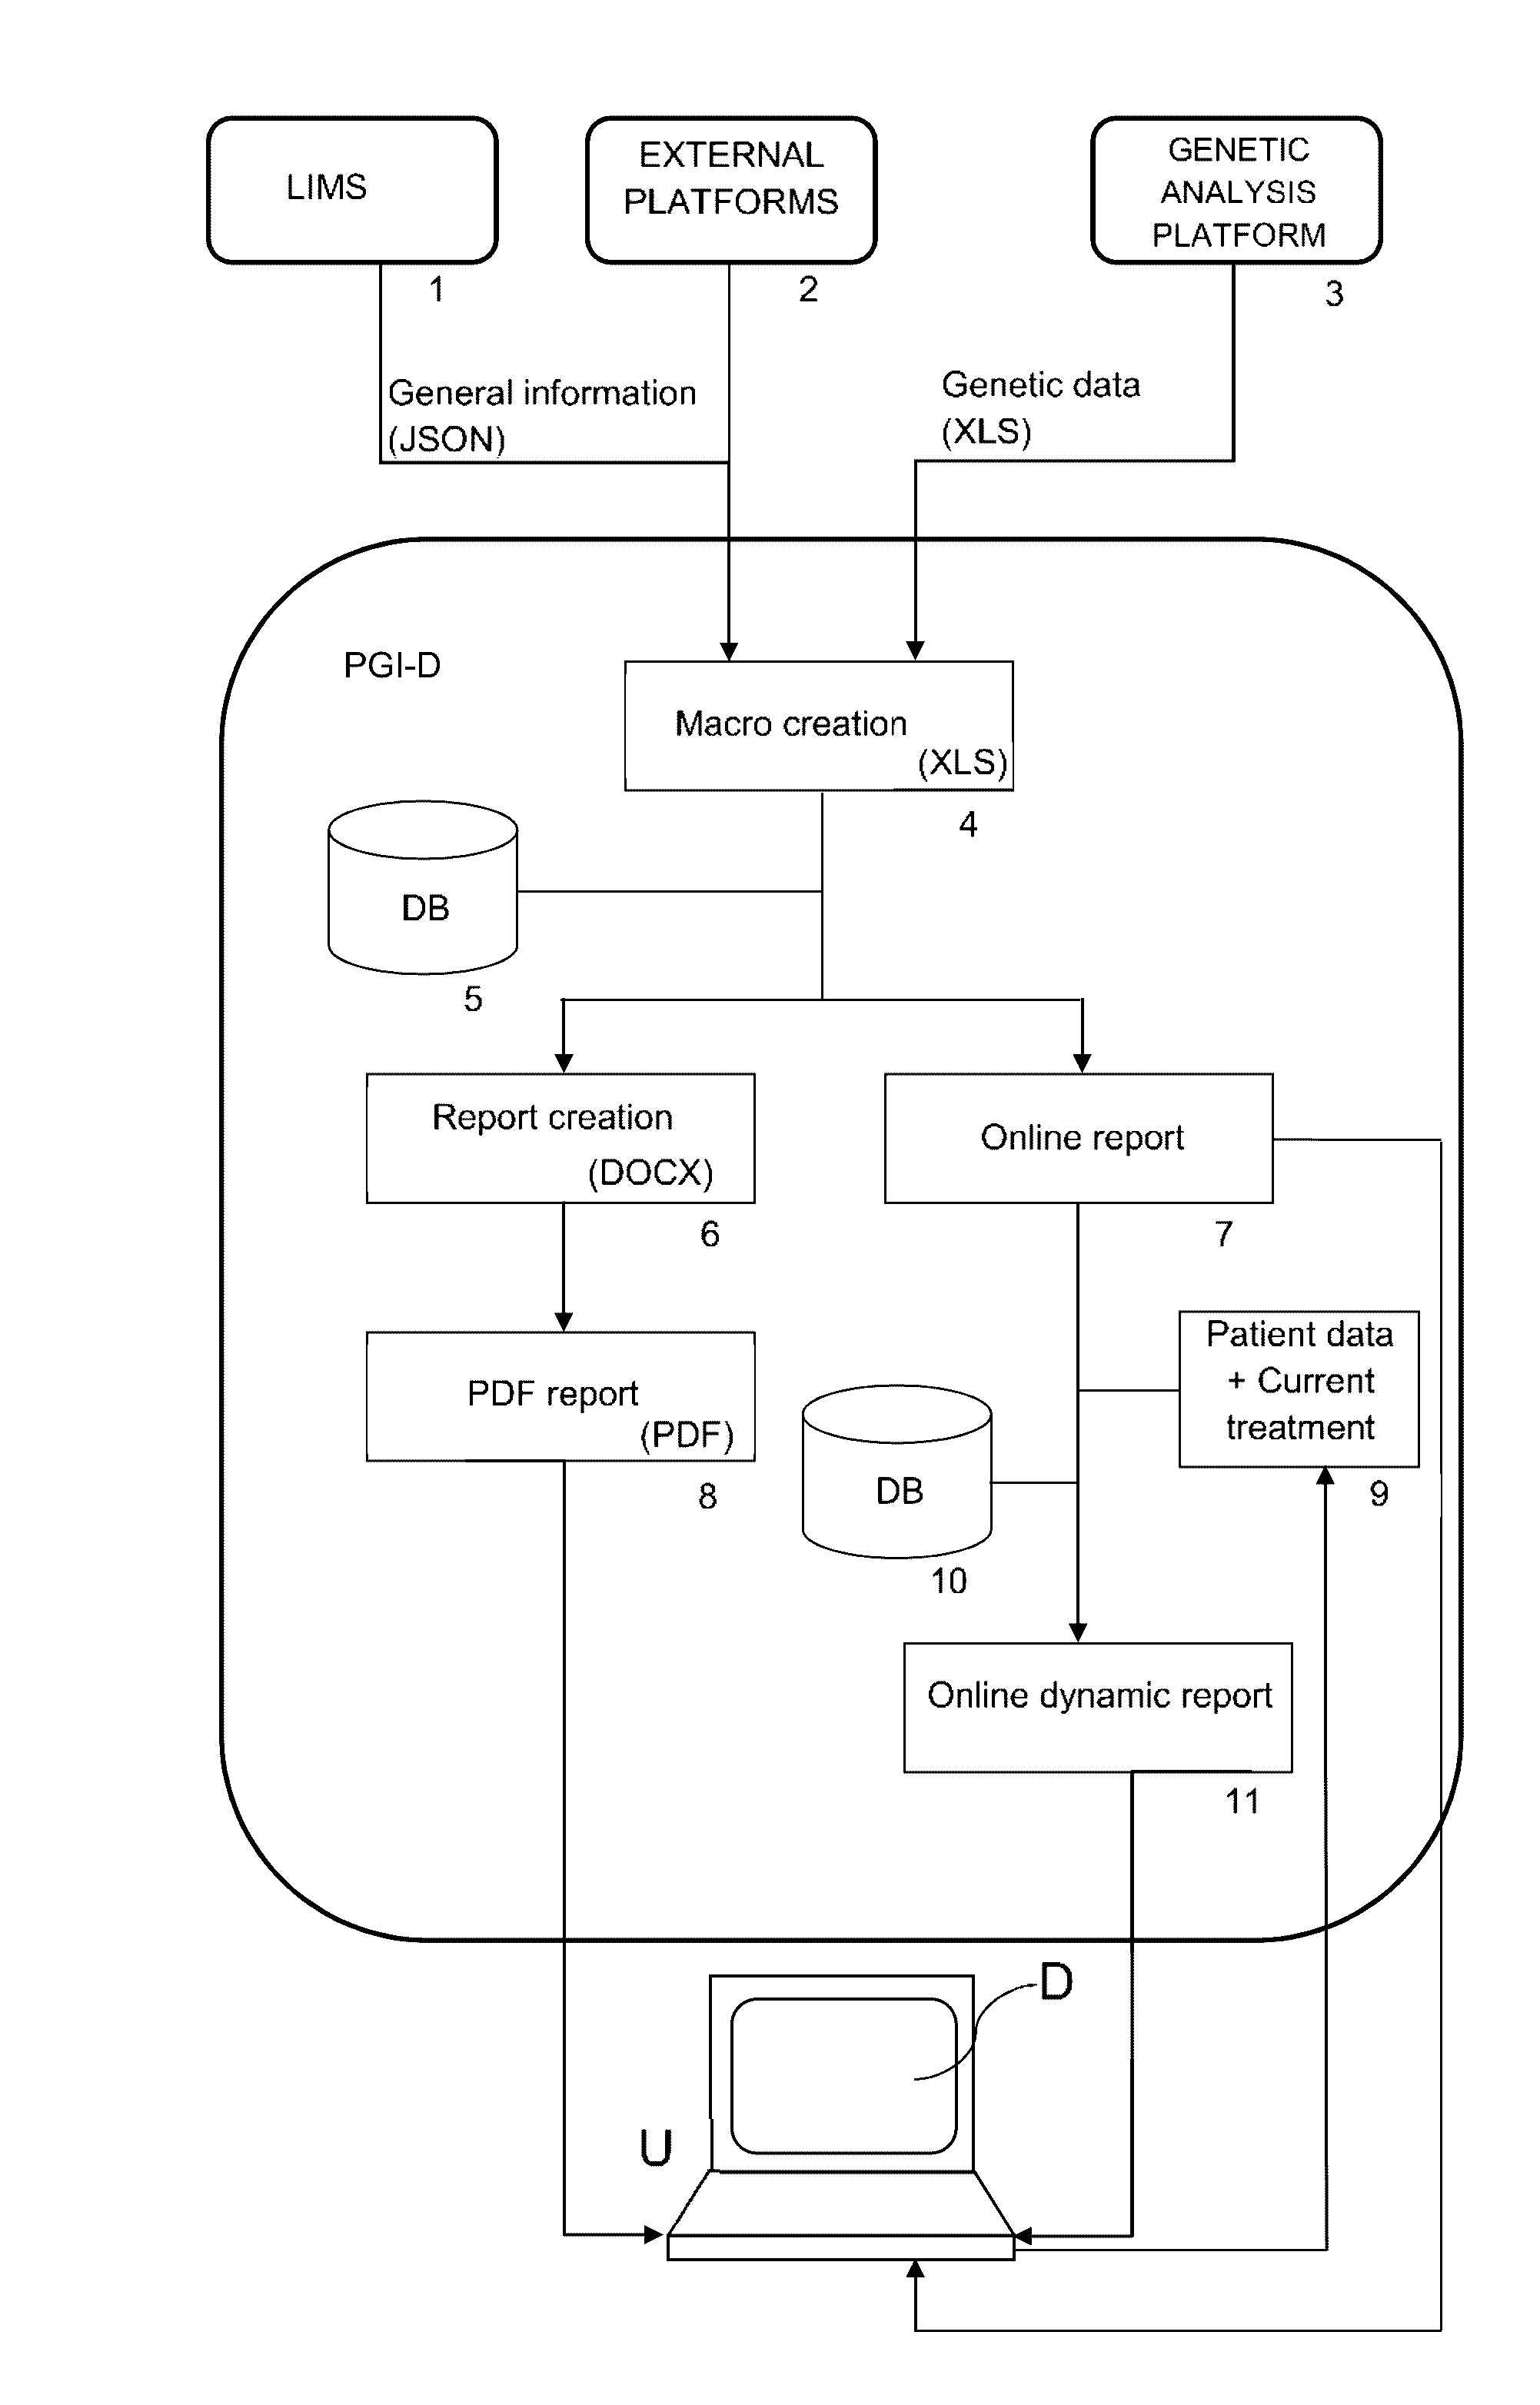 Web-based computer-aided method and system for providing personalized recommendations about drug use, and a computer-readable medium